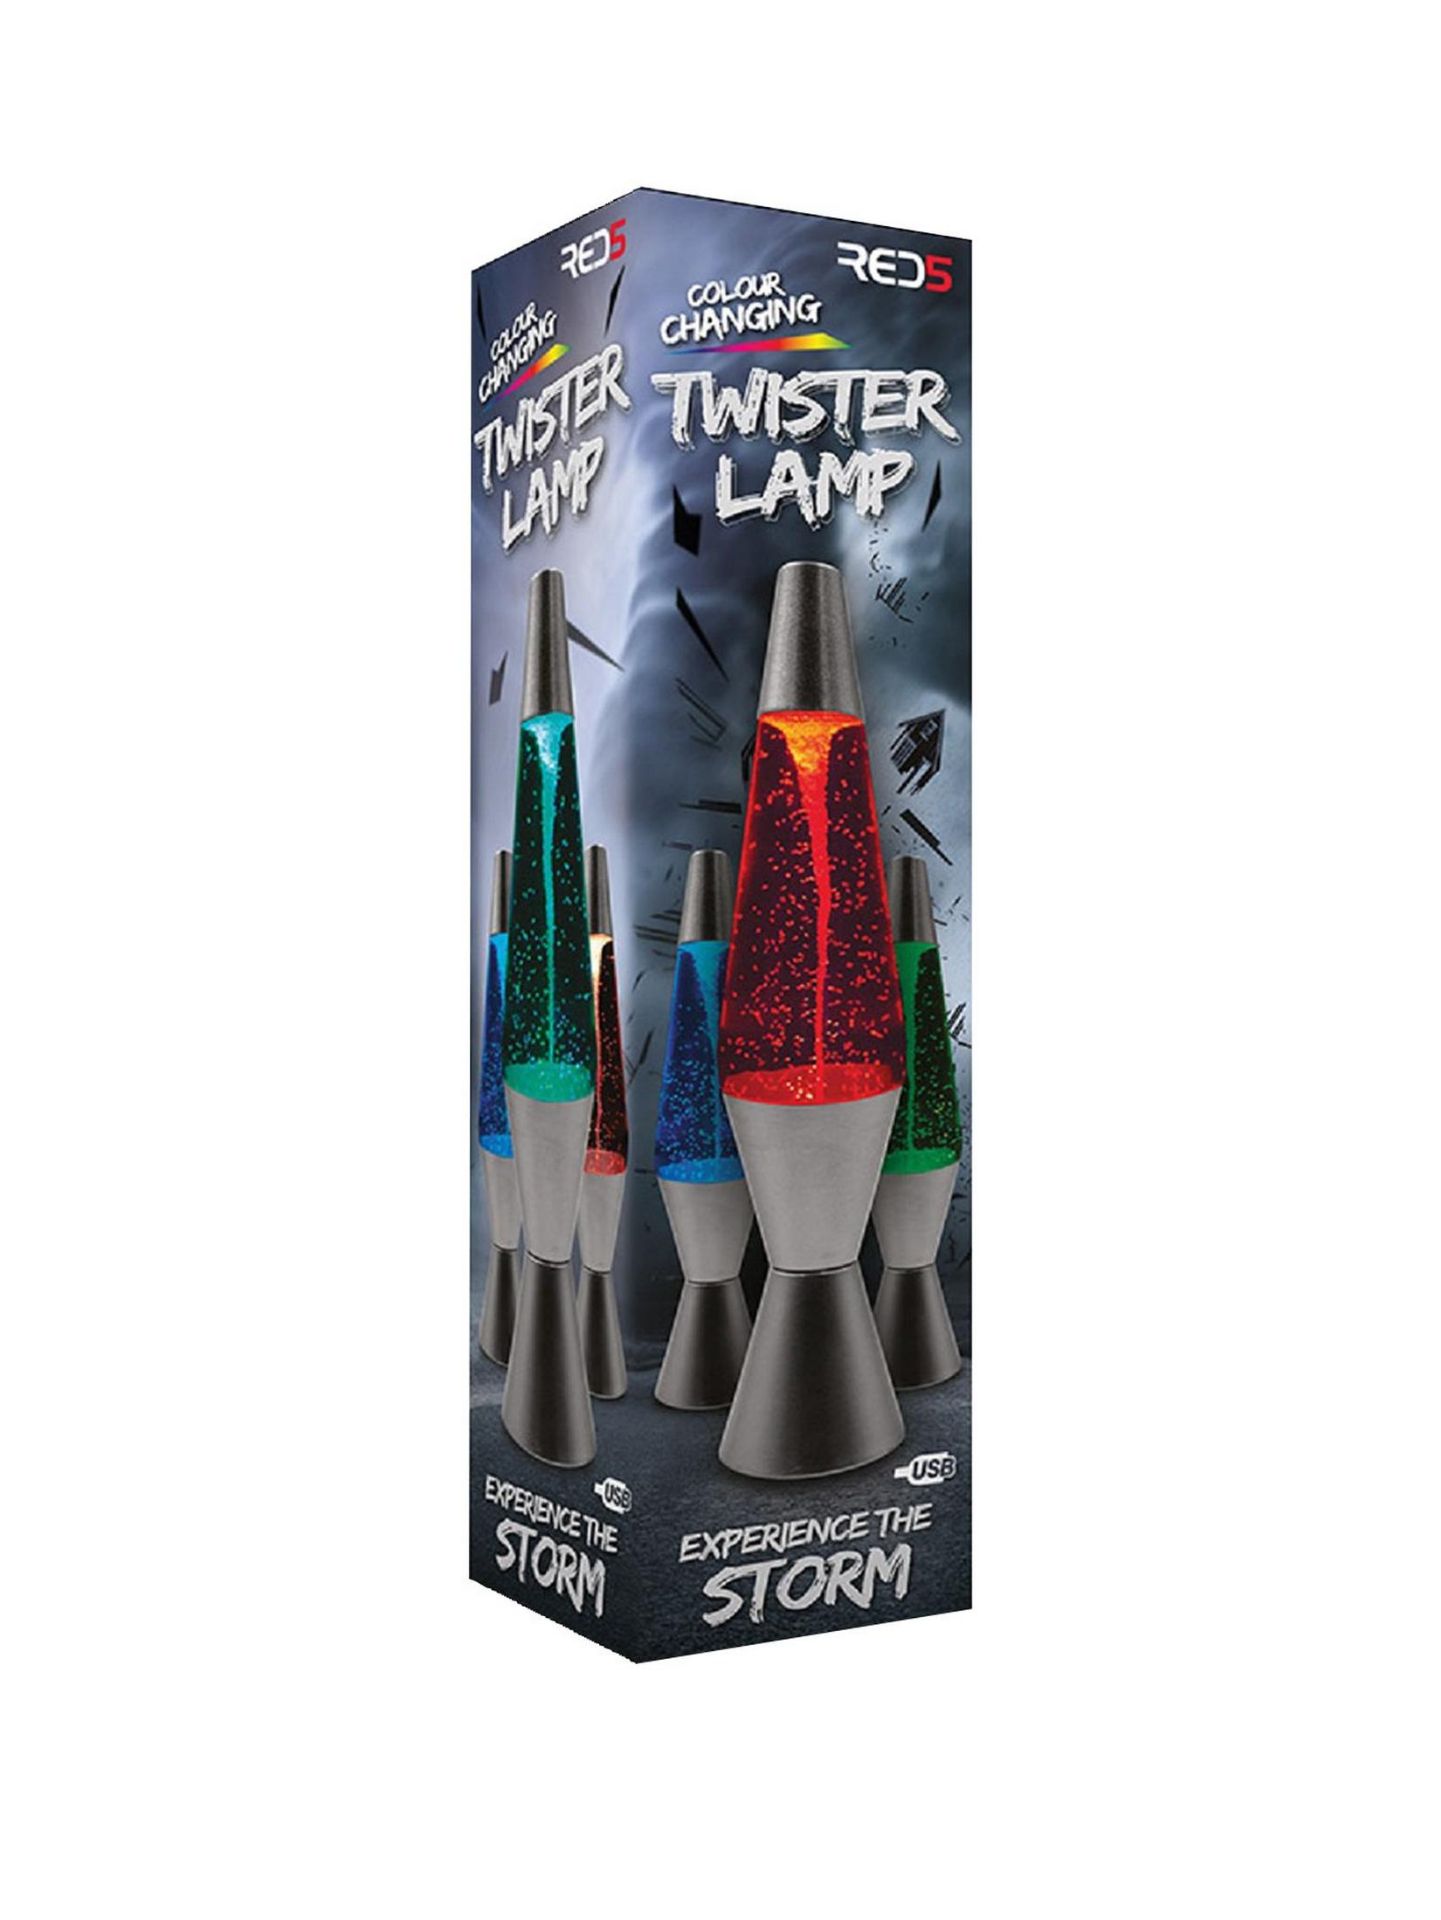 Title: (88/P) 10x Red5 Colour Changing Twister Lamp RRP £20 Each (All Units Have Return To